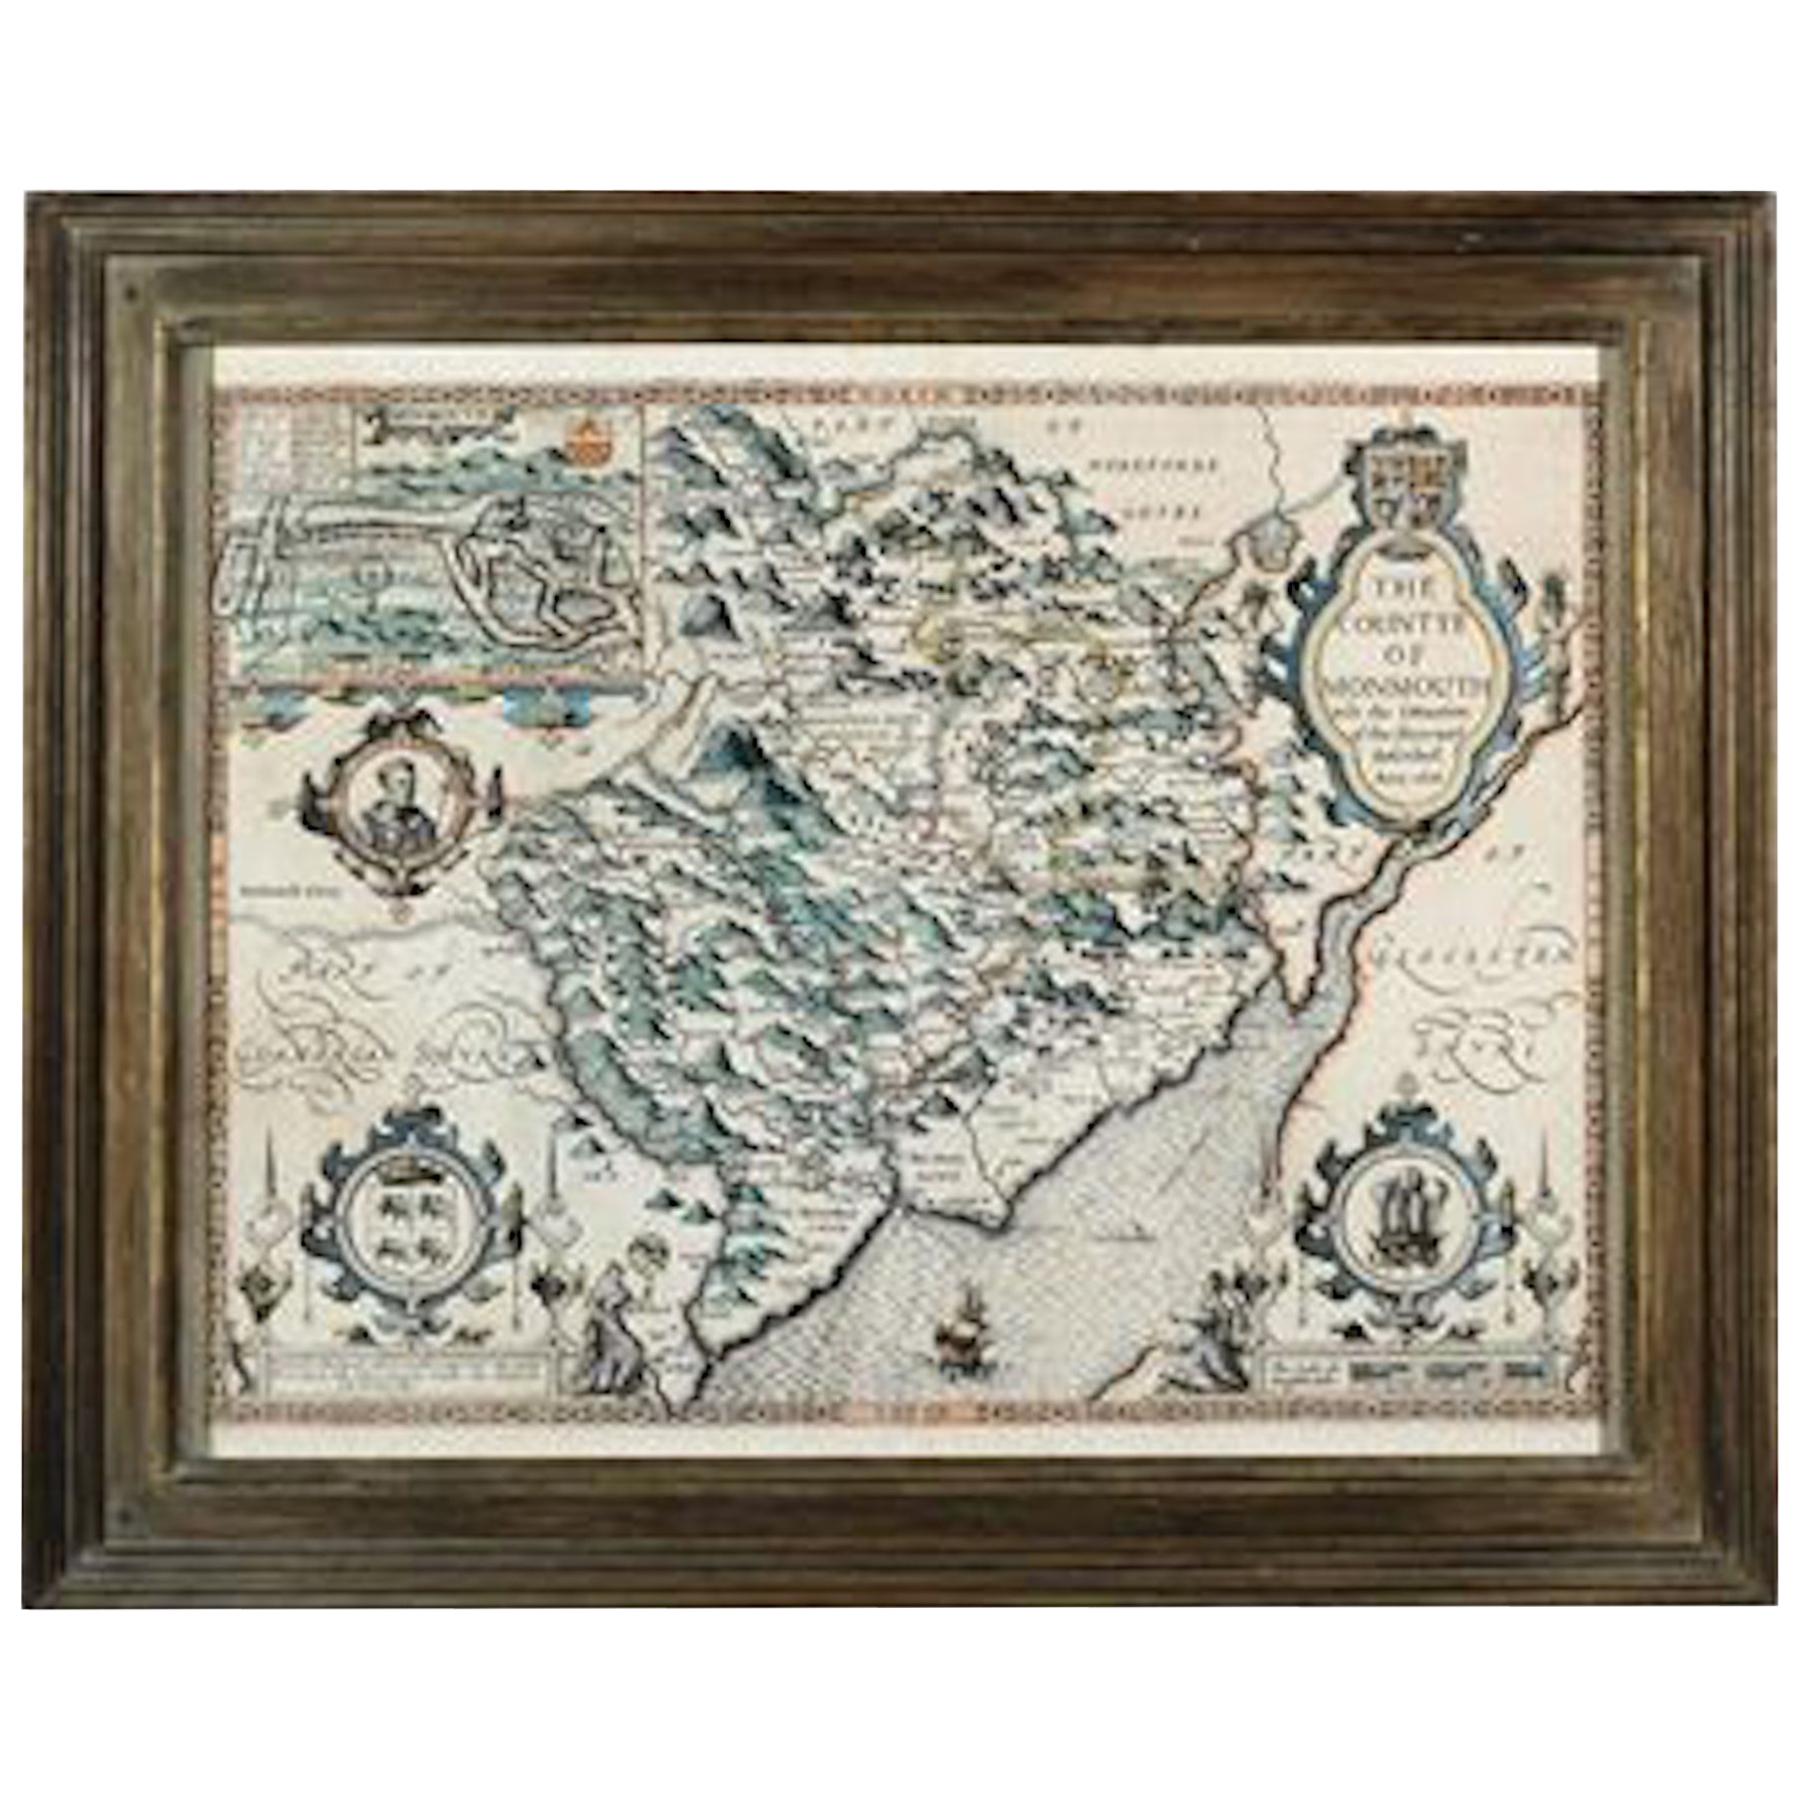 Countye of Monmouth, Dated 1610